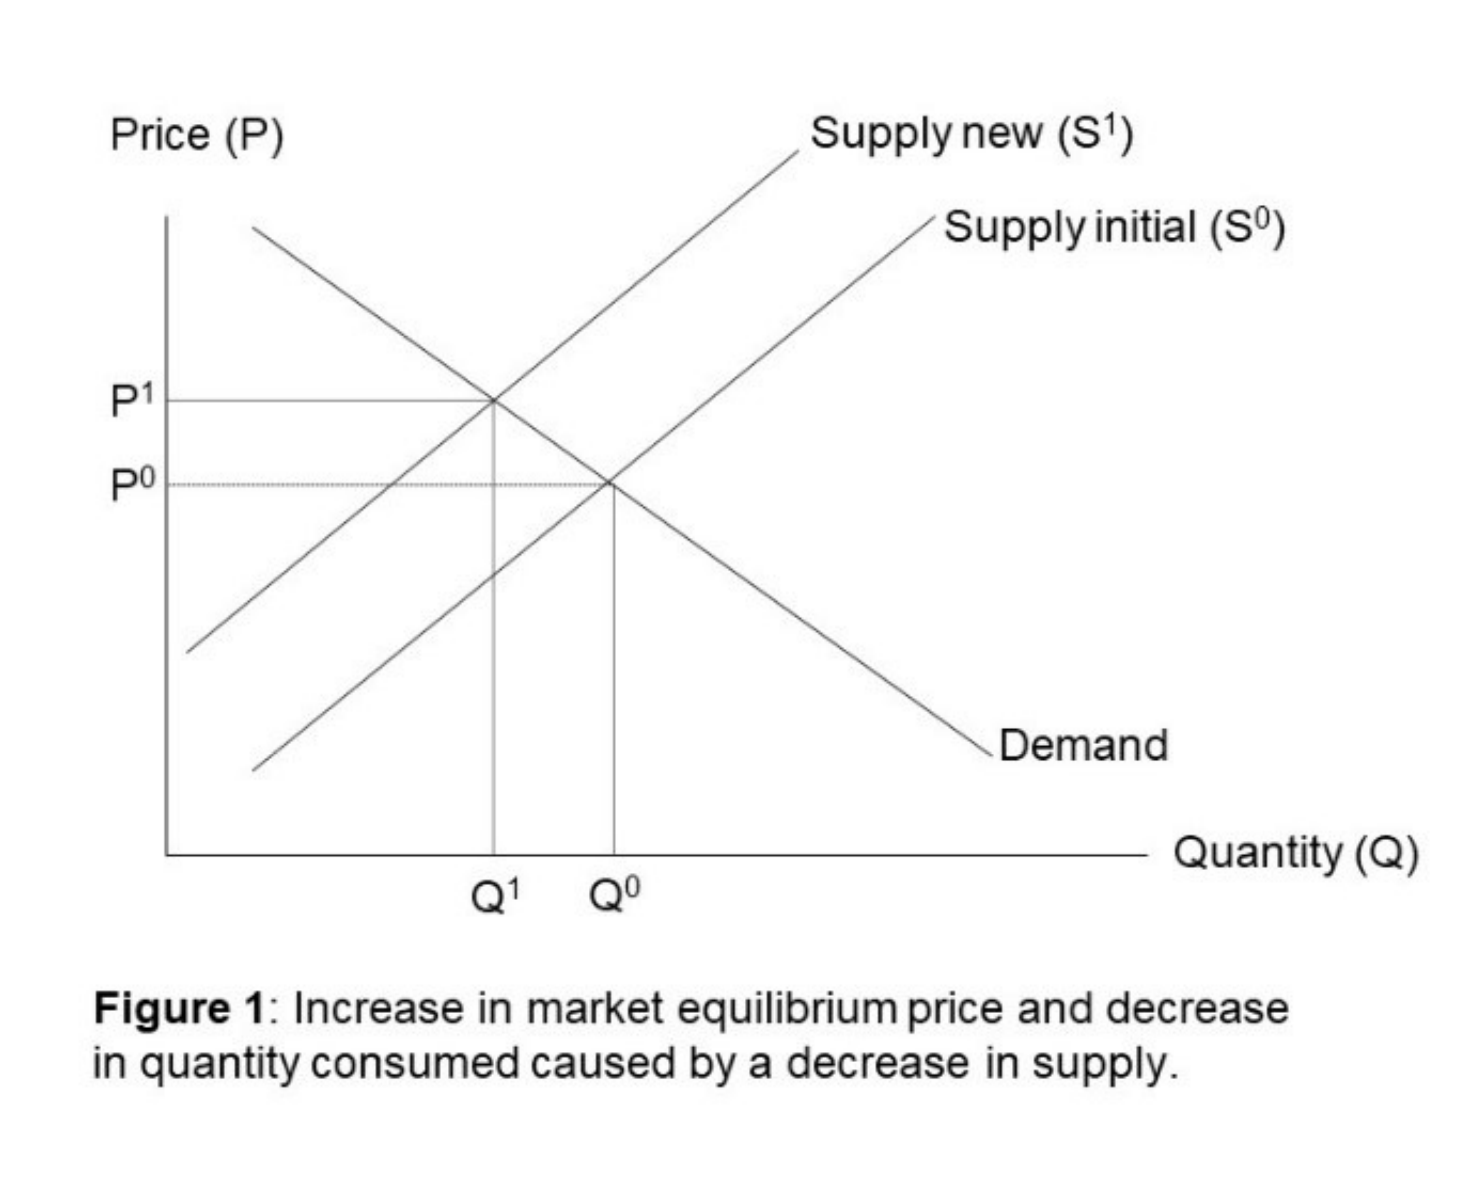 Figure 1: Increase in market equilibrium price and decrease in quantity consumed caused by a decrease in supply.